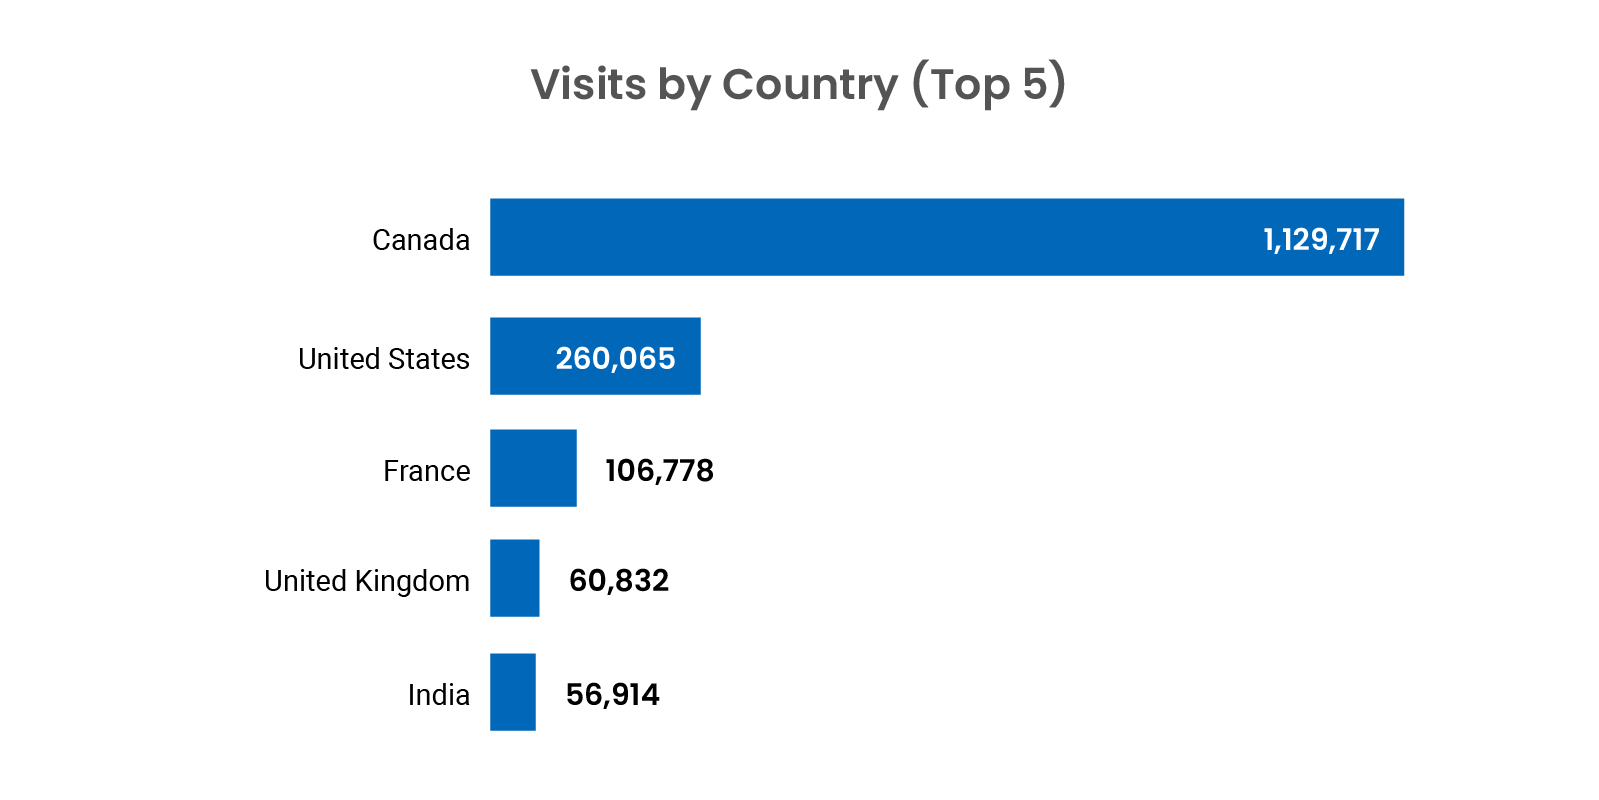 Image showing visits by country